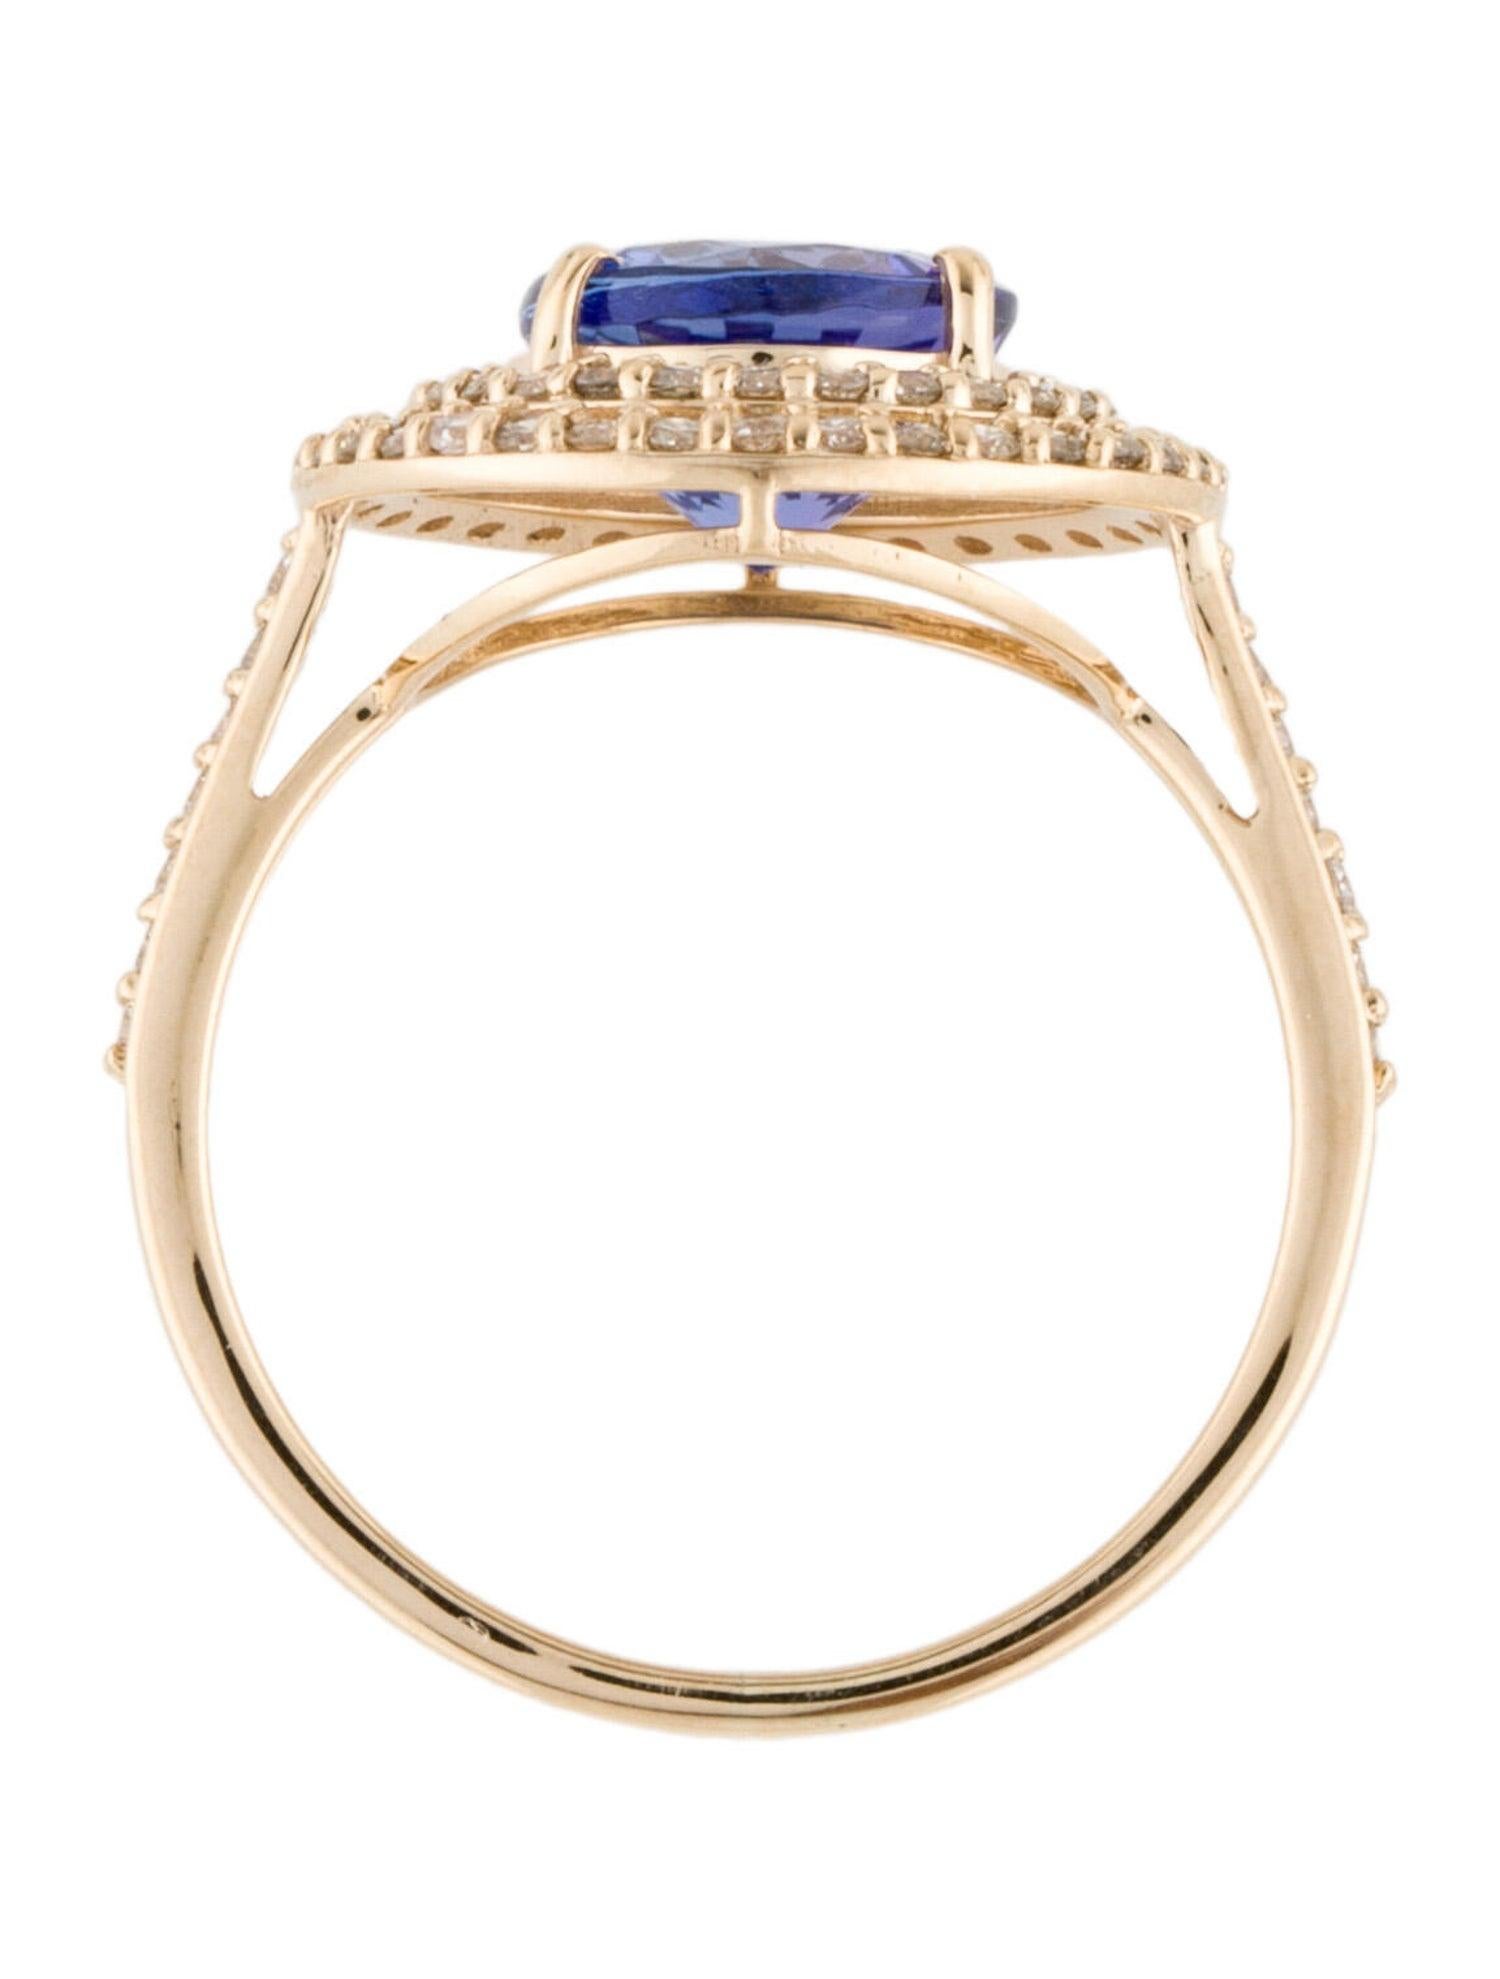 14K Tanzanite & Diamond Cocktail Ring - Size 6.75 - Luxury Statement Jewelry In New Condition For Sale In Holtsville, NY